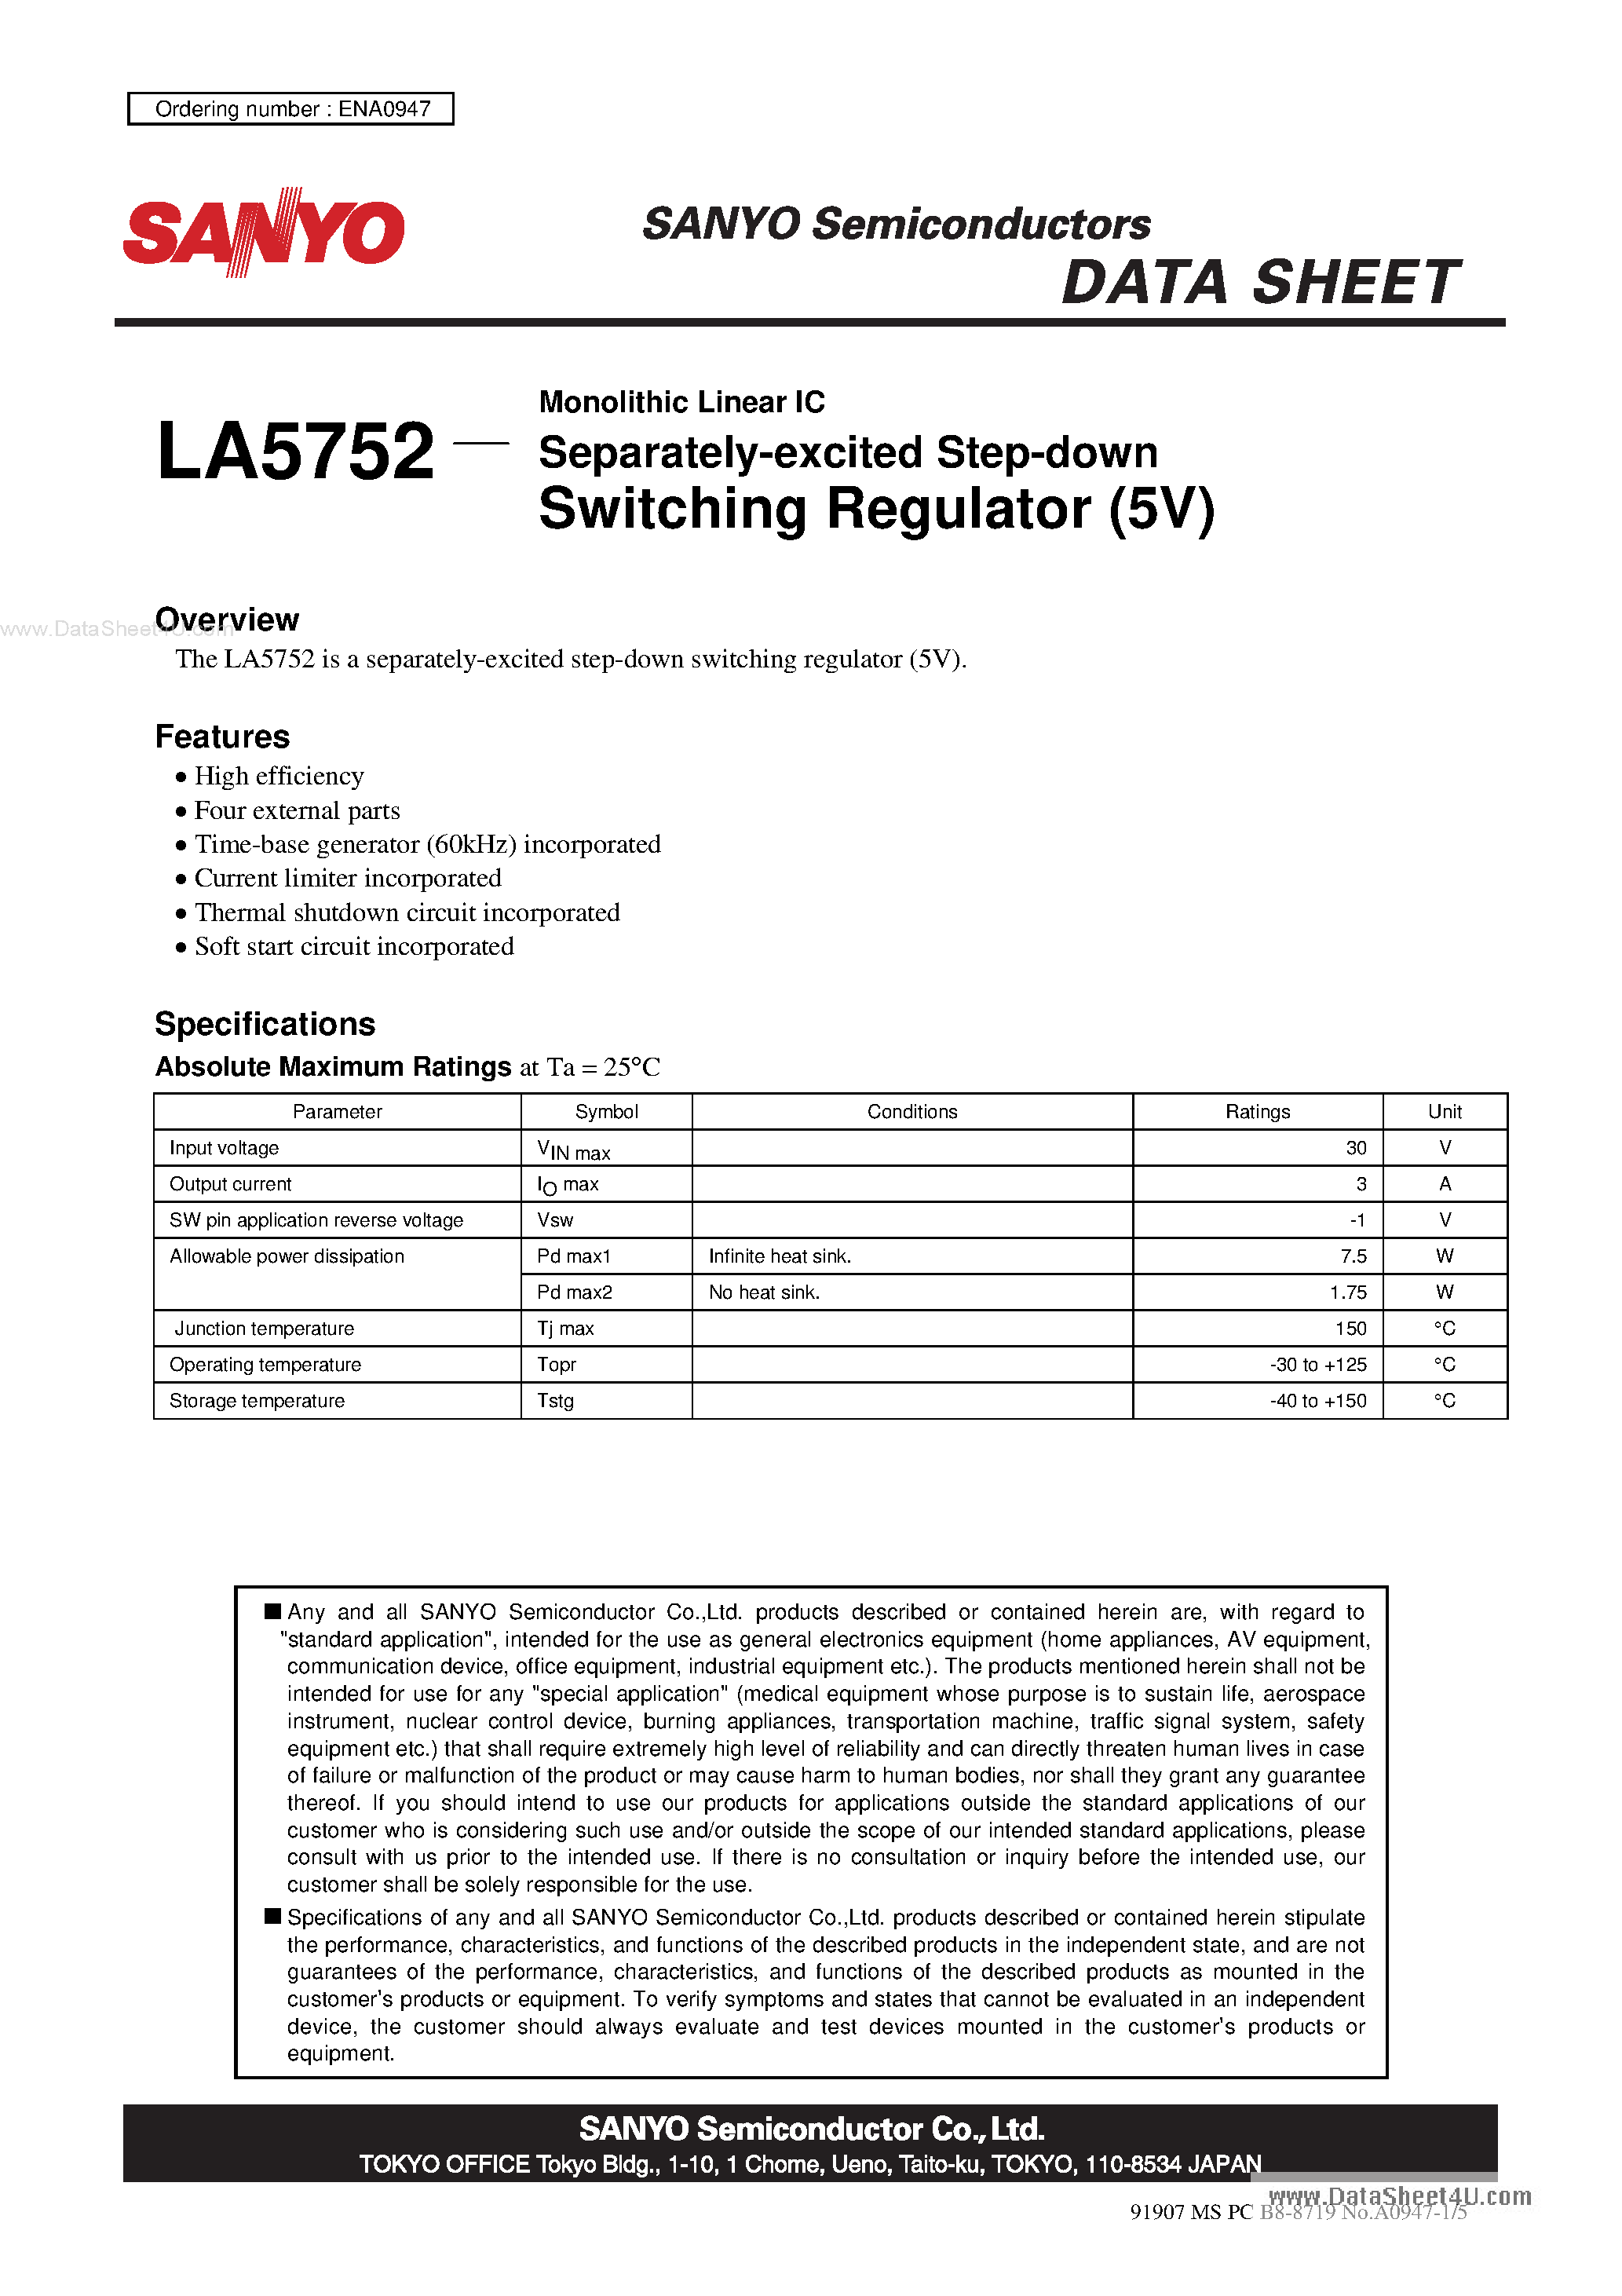 Даташит LA5752 - Monolithic Linear IC Separately-Excited Step-Down Switching Regulator страница 1